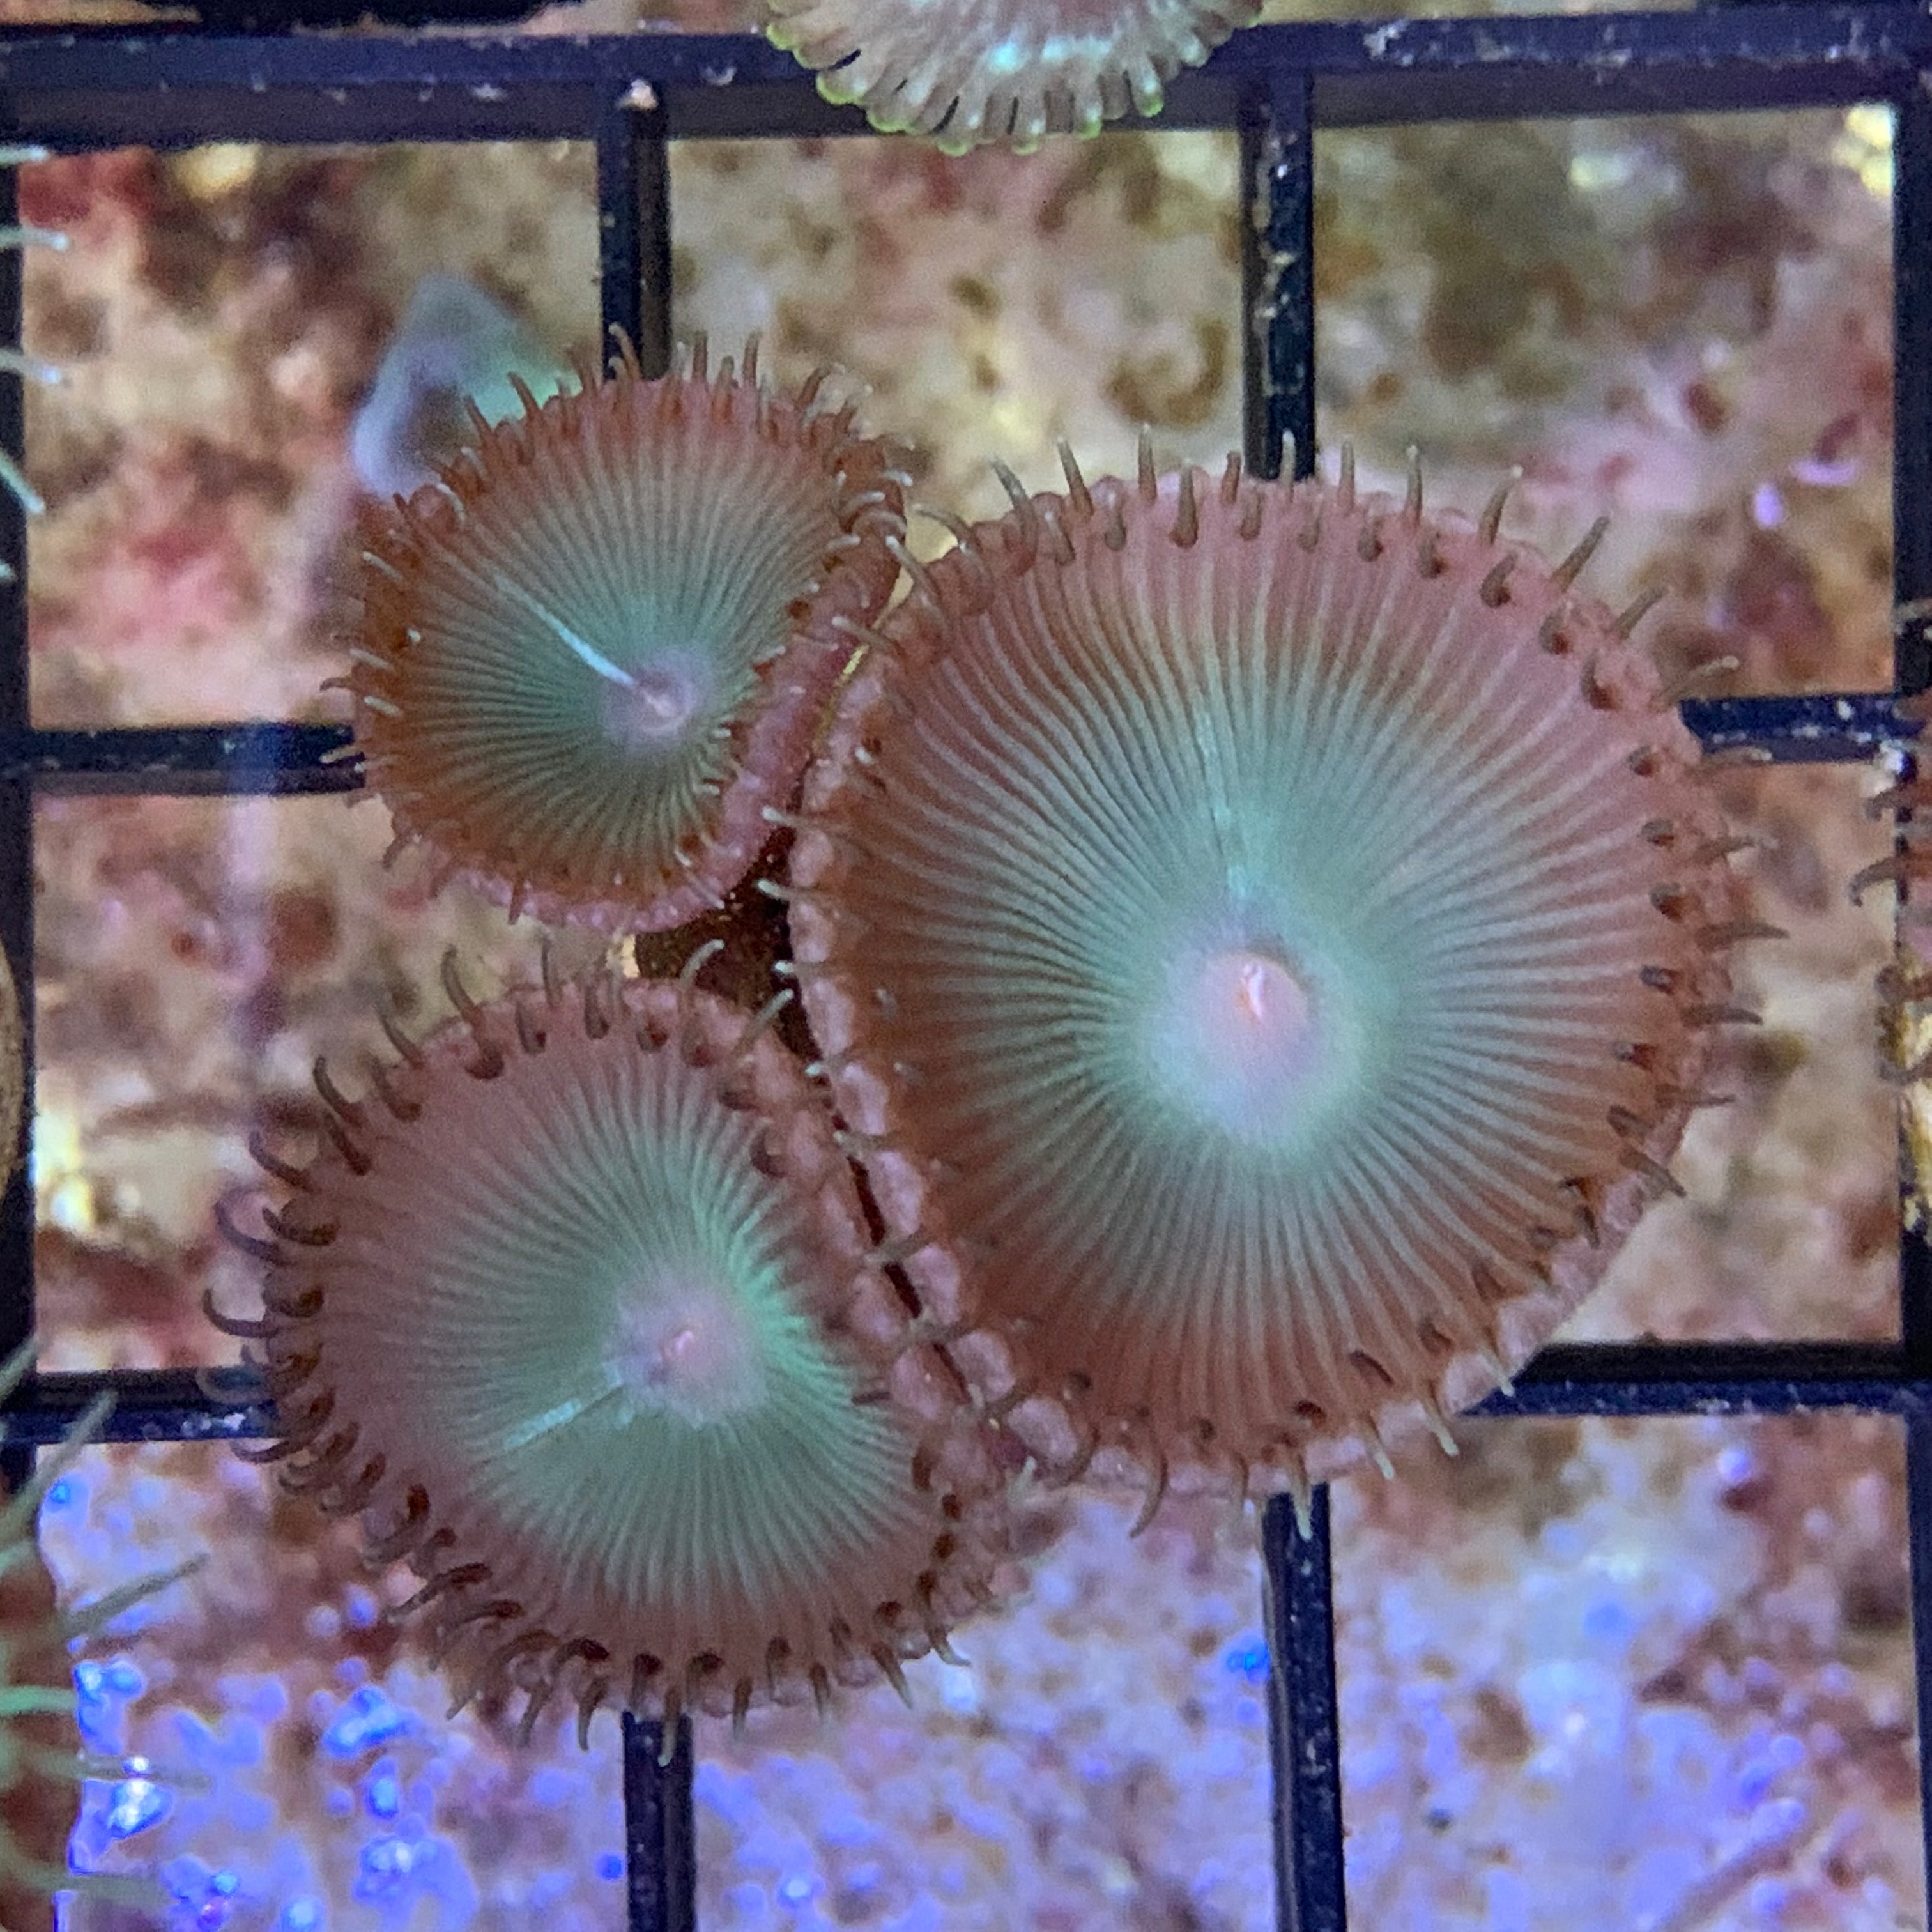 3 Polyps Saturn’s Ring paly Zoa